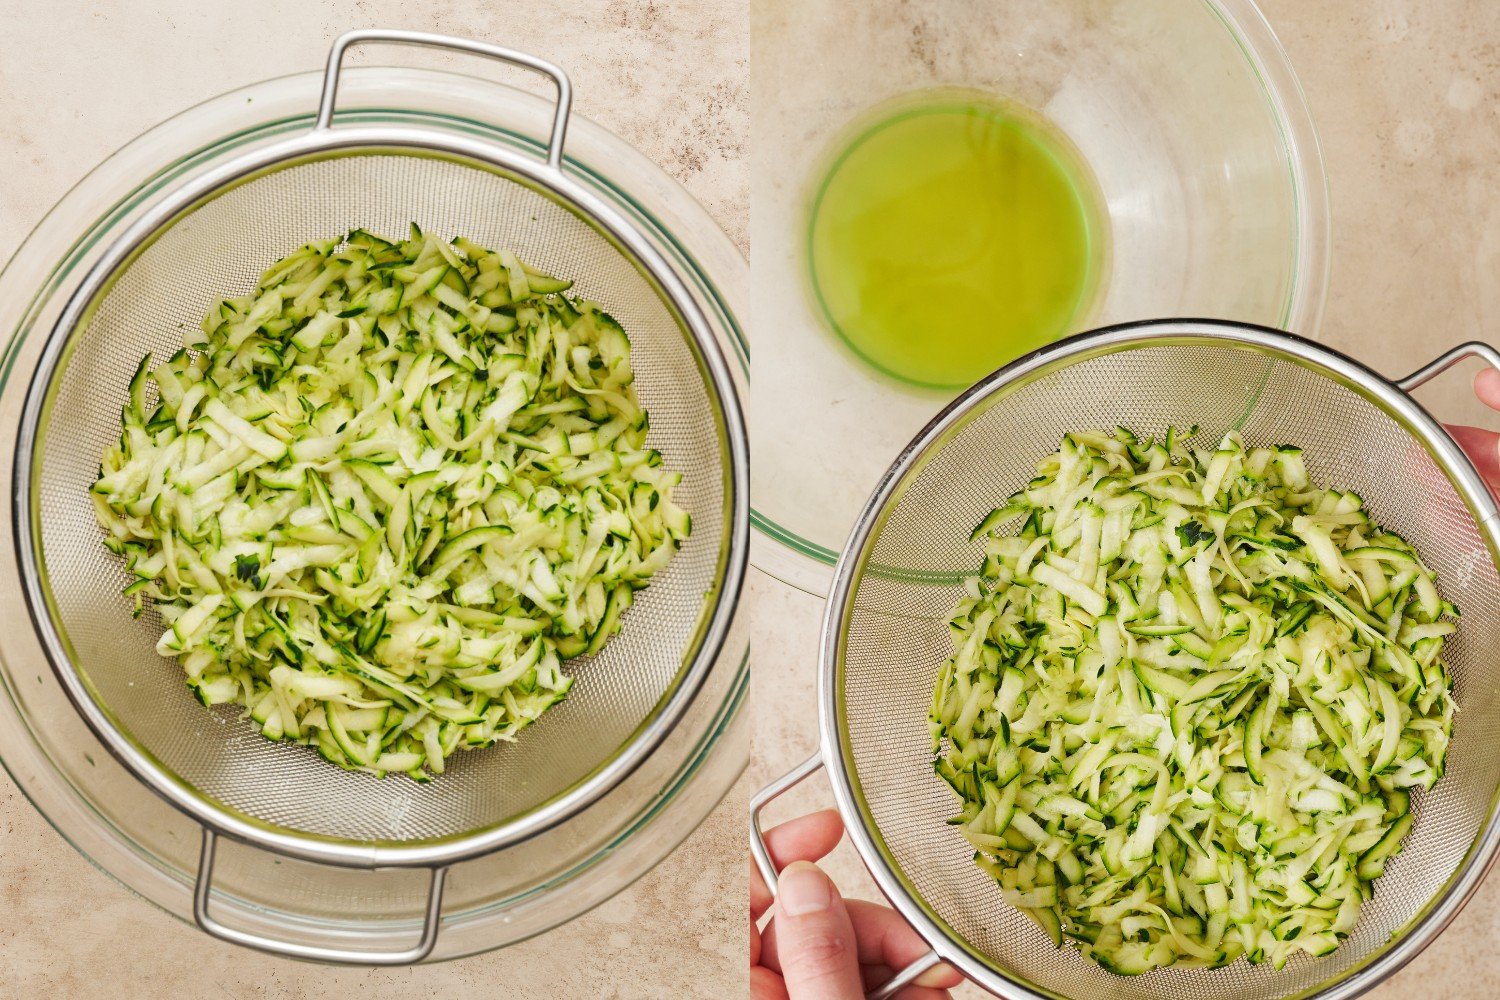 two side-by-side images showing the grated zucchini in a strainer over a bowl, and then removing the strainer after the excess liquid has drained.